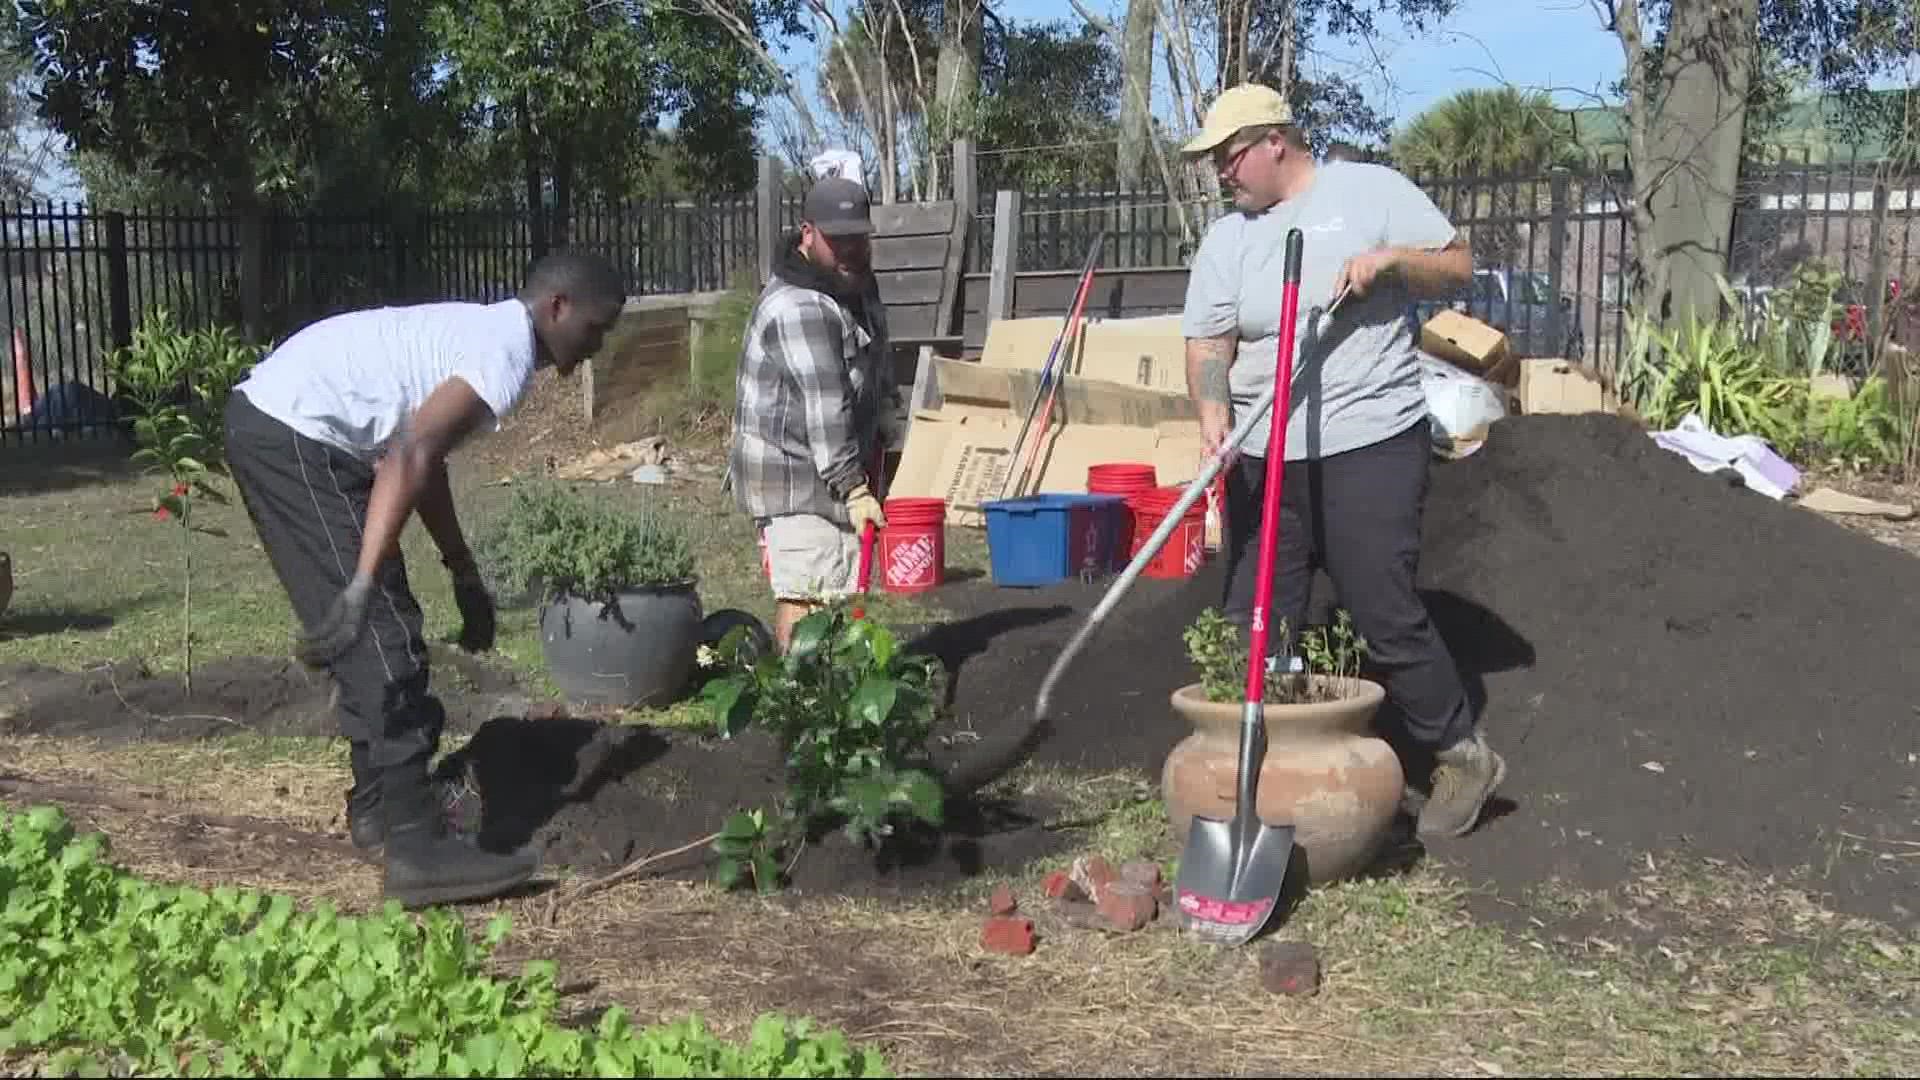 Earlier this week volunteers and veterans at the Clara White Mission began planting 200 fruit trees that will help fight food insecurity in Northwest Jacksonville.